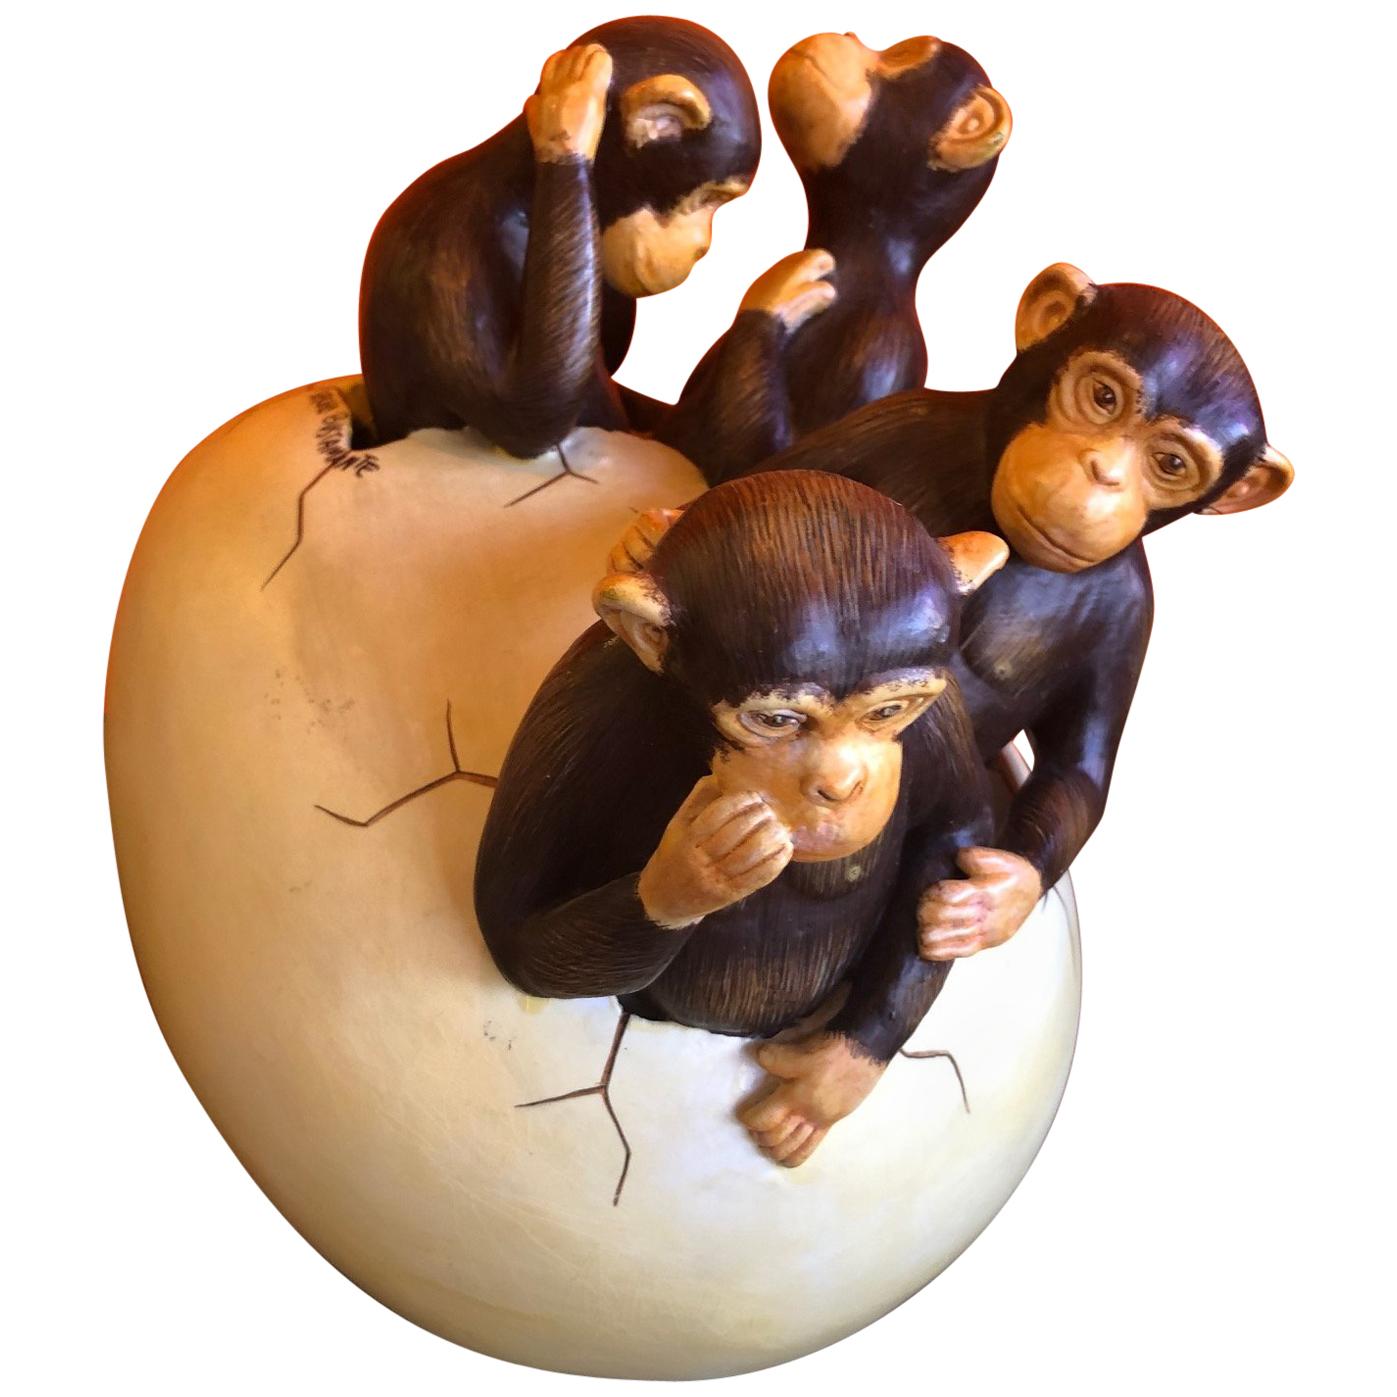 Ceramic Hatching Monkeys from Egg Sculpture by Sergio Bustamante